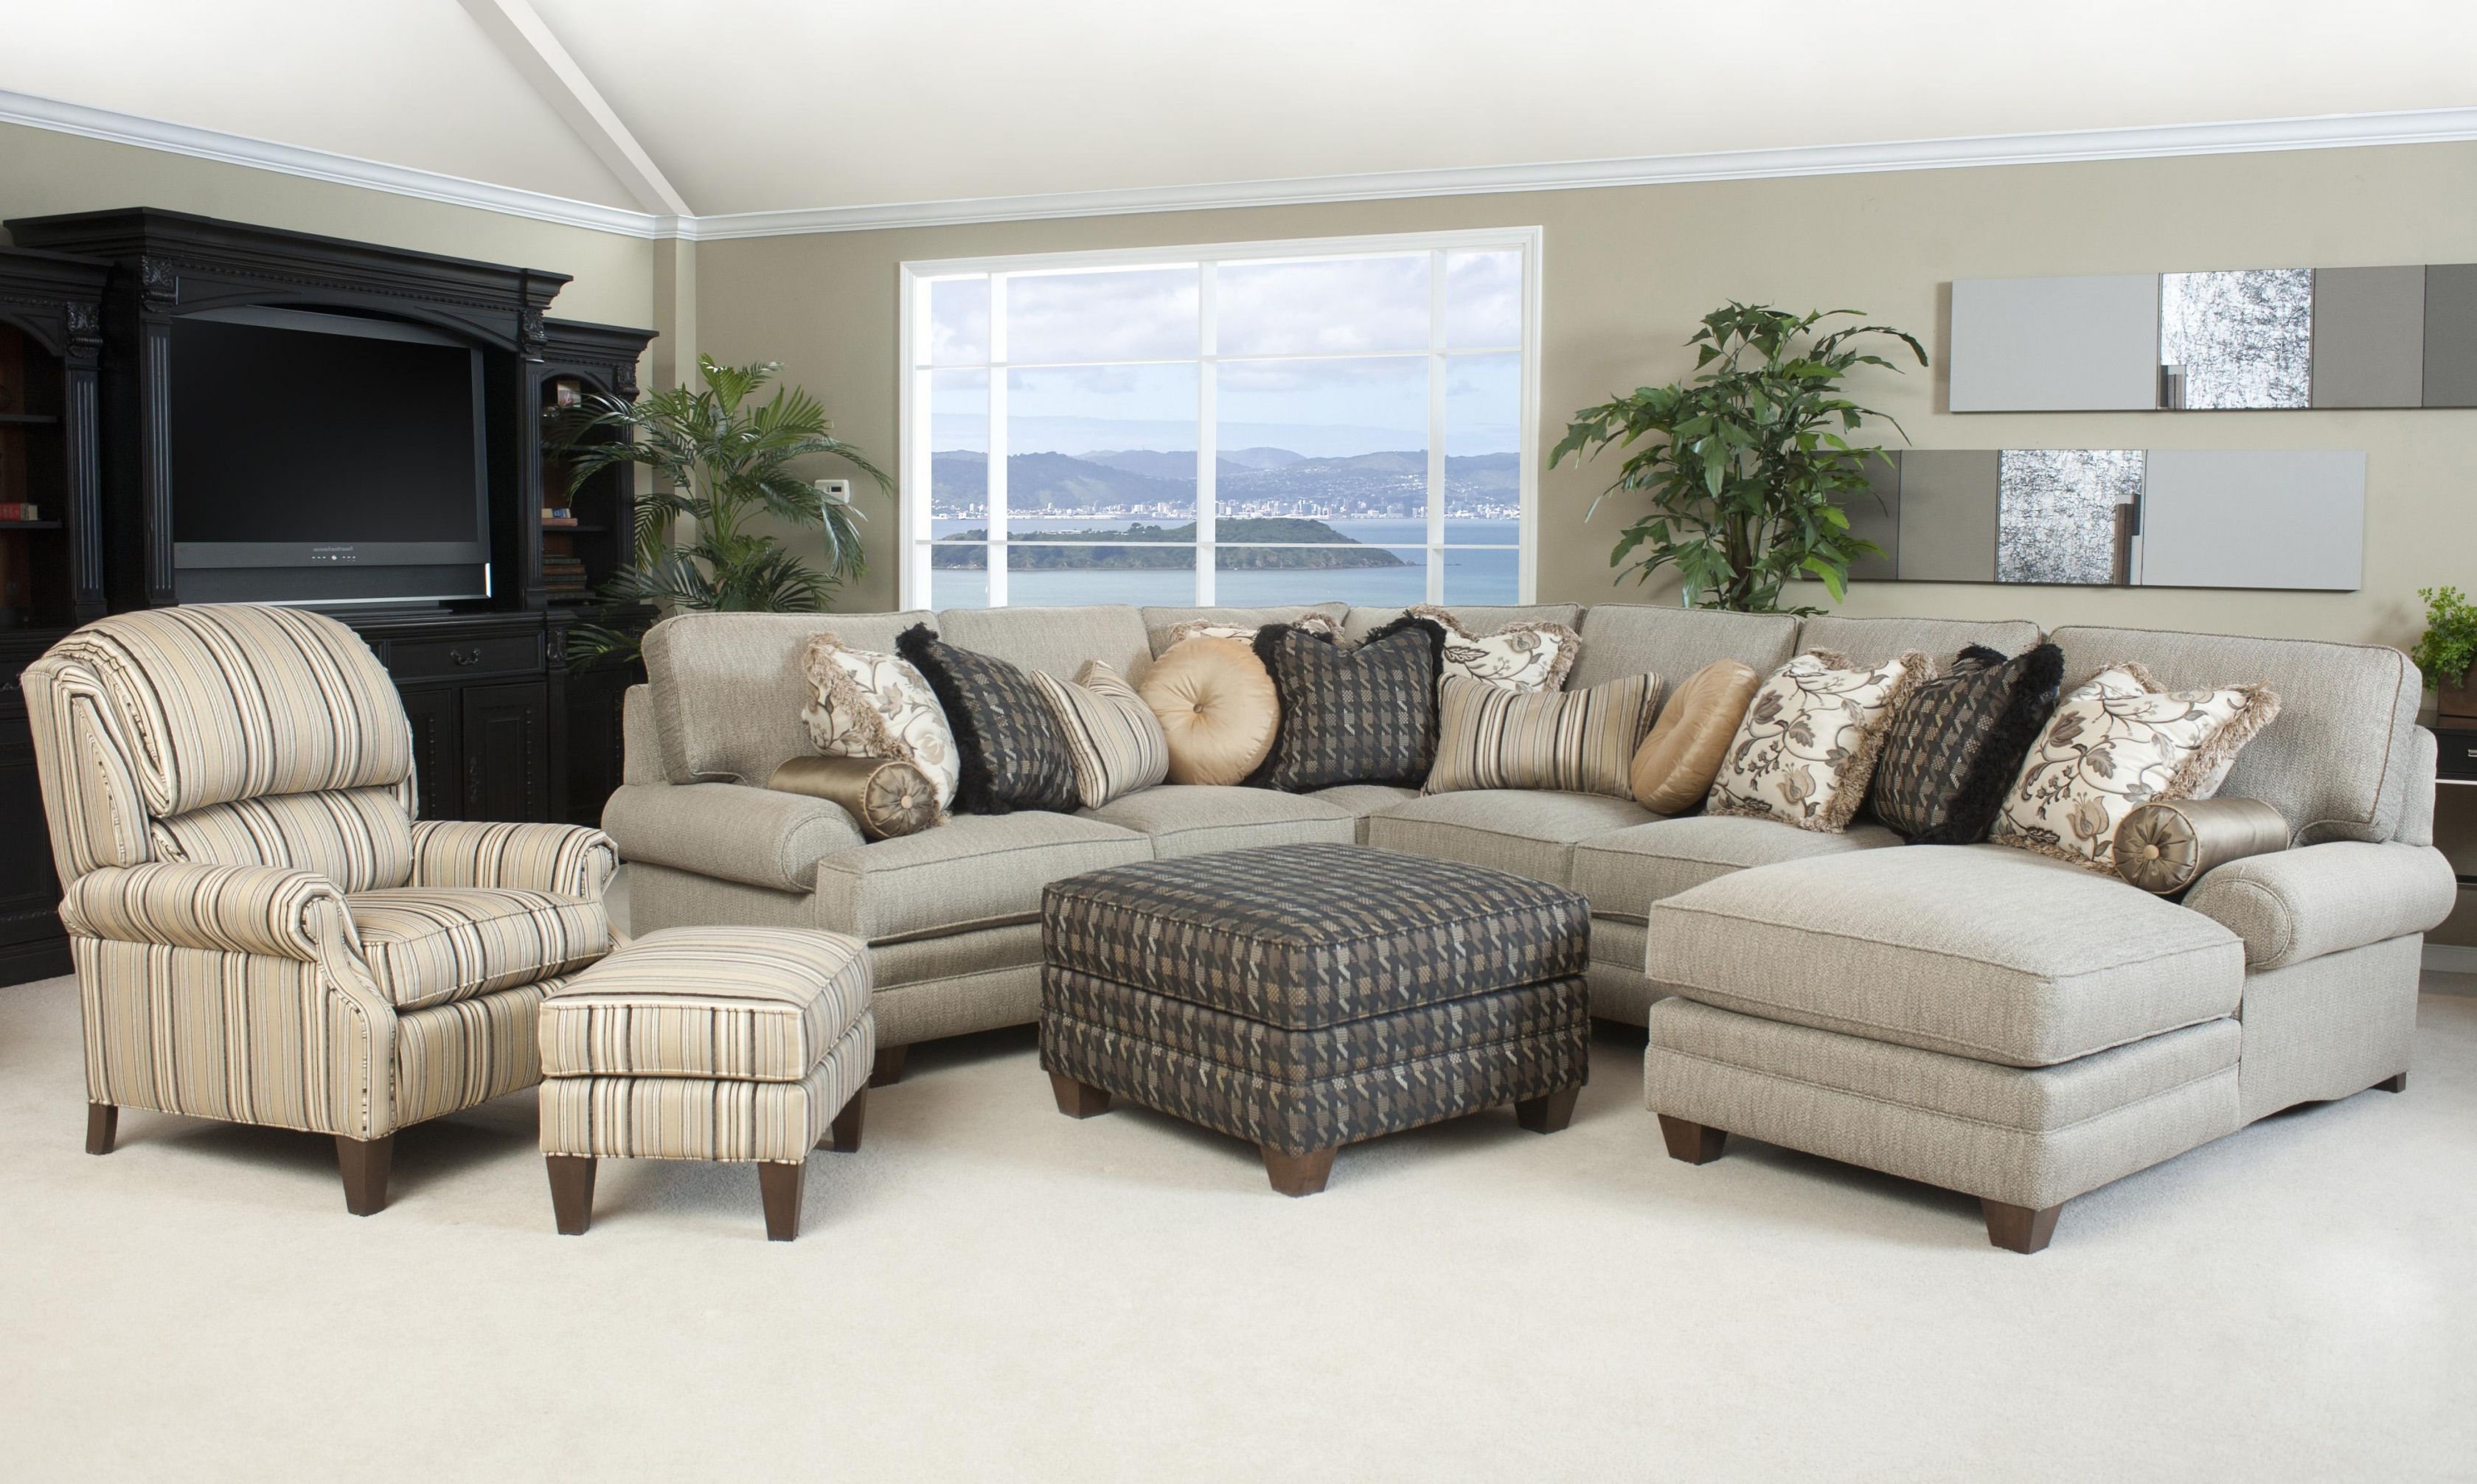 Comfortable Sectional Sofa With Regard To Comfortable Sectional Sofa (View 7 of 15)